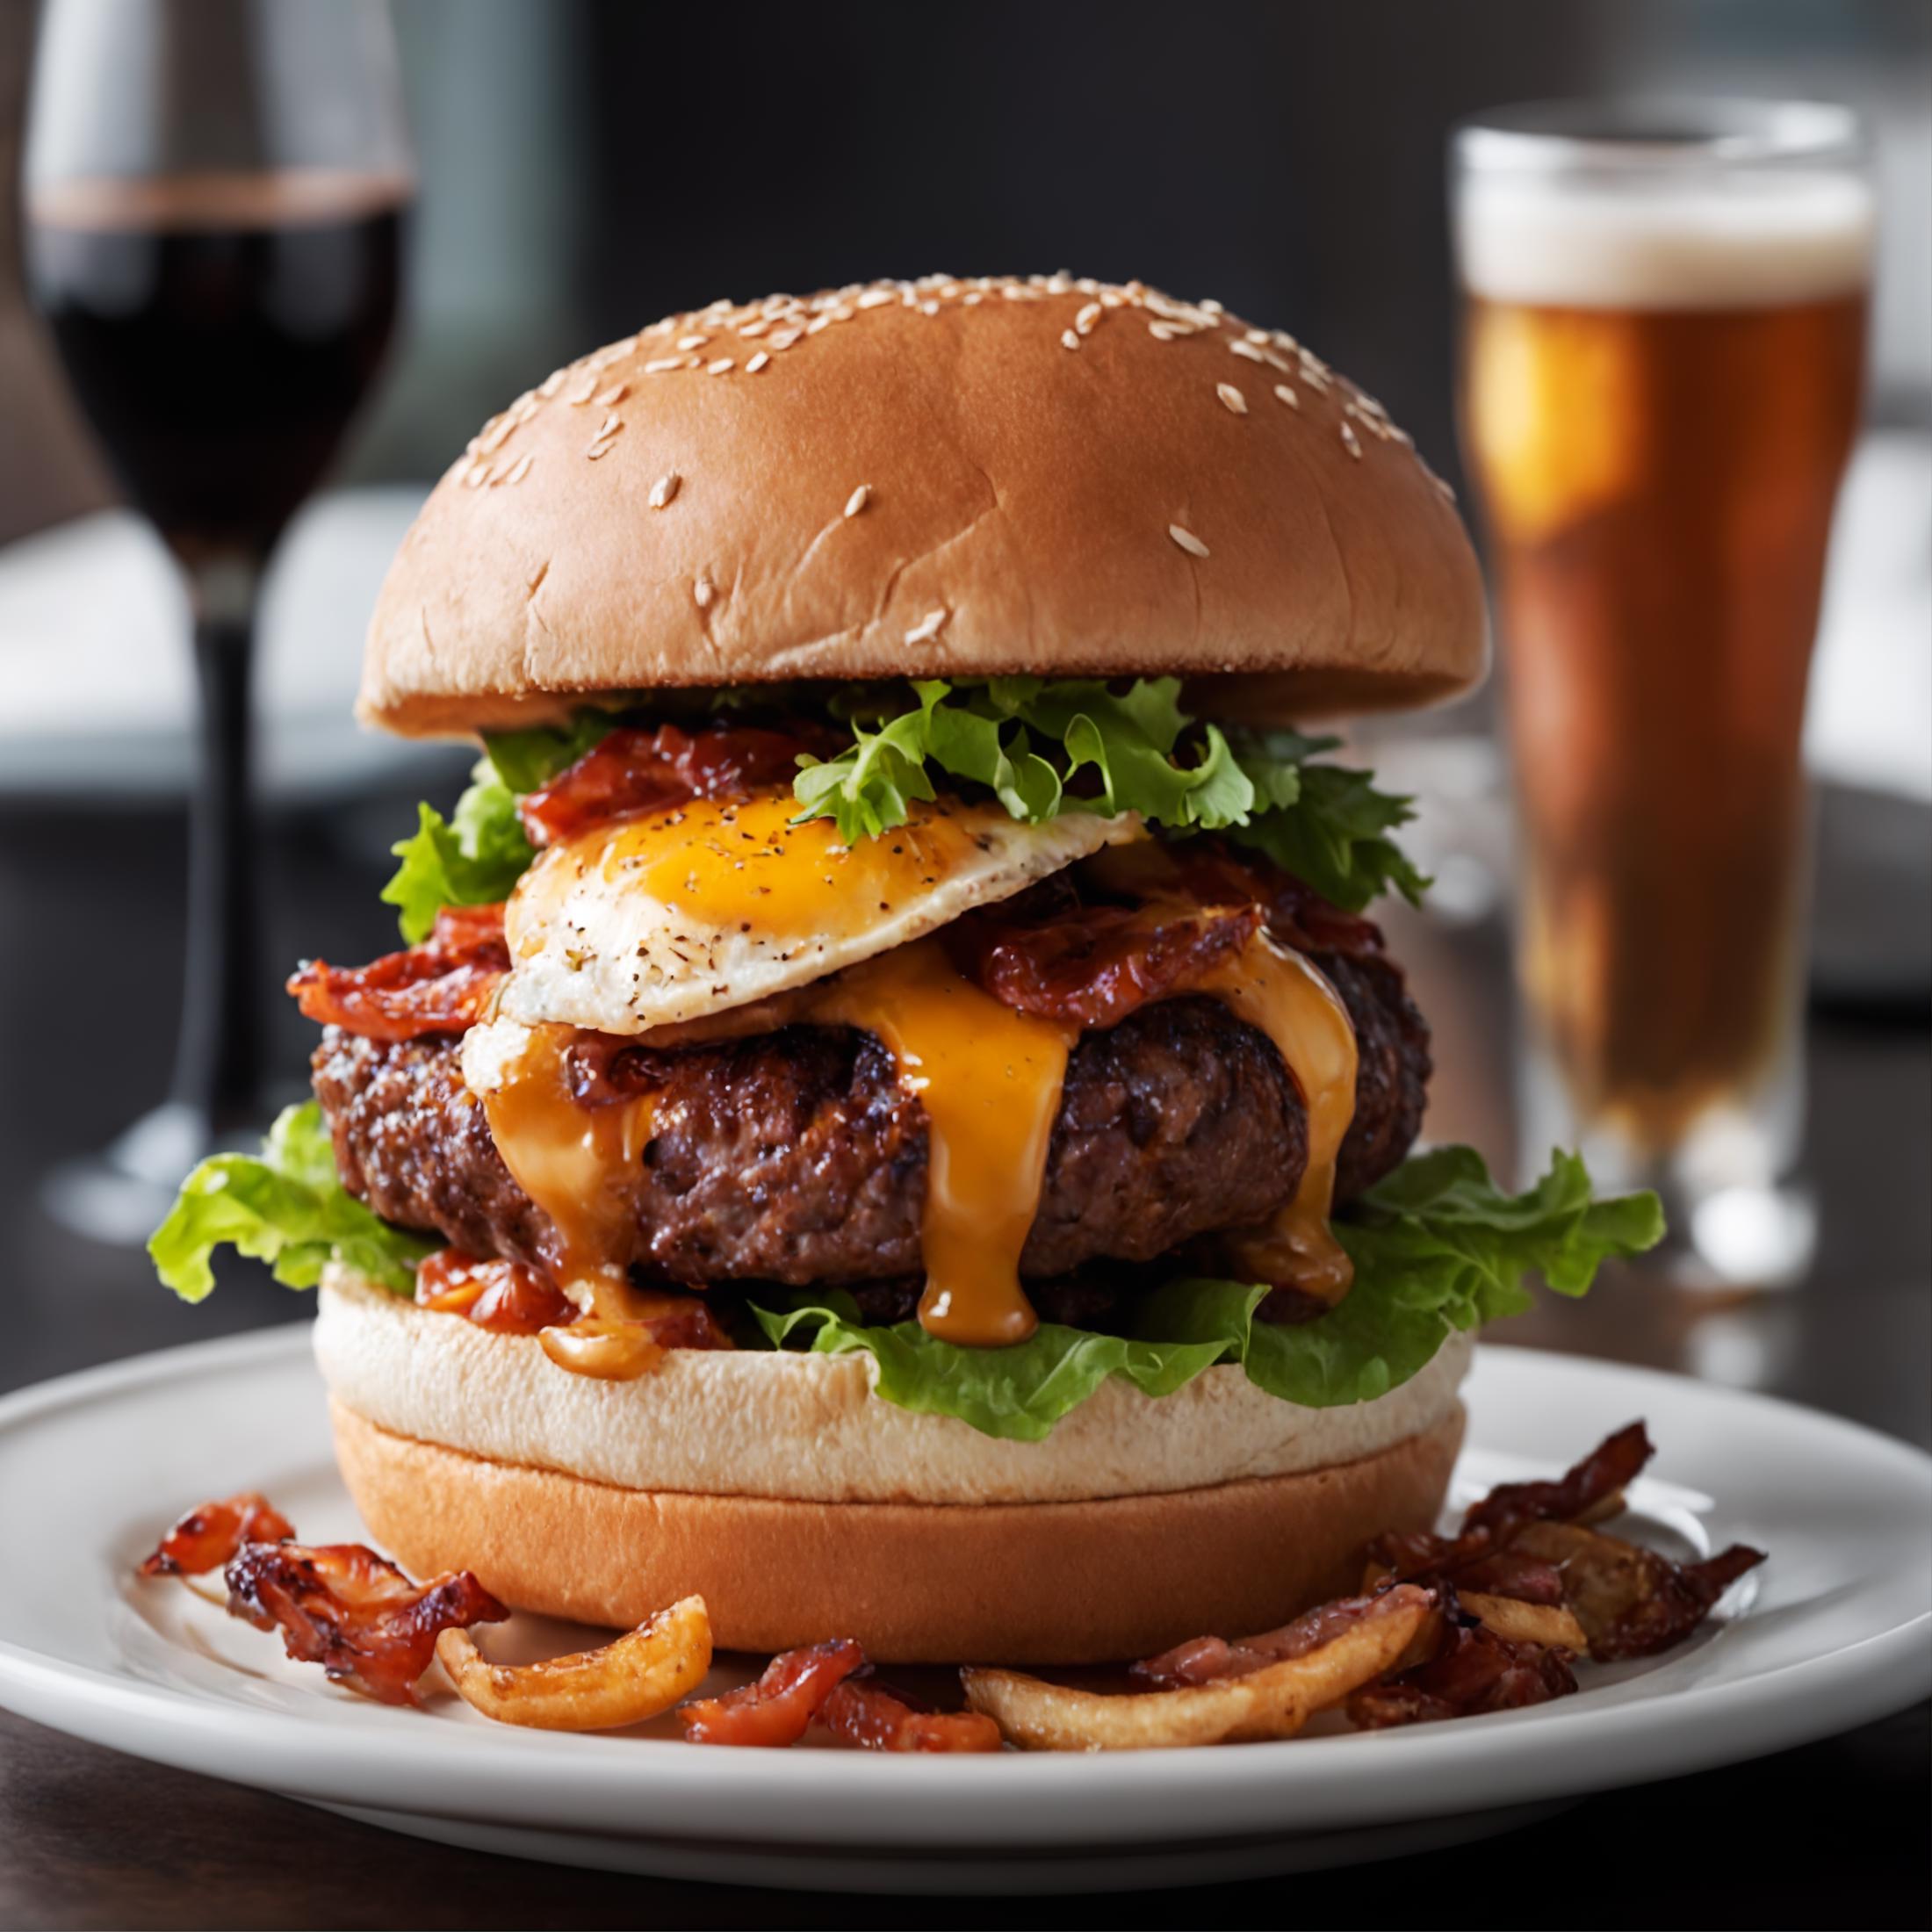 A Burger with Bacon, Cheese and Eggs on a Bread Bun, Served with a Glass of Beer.